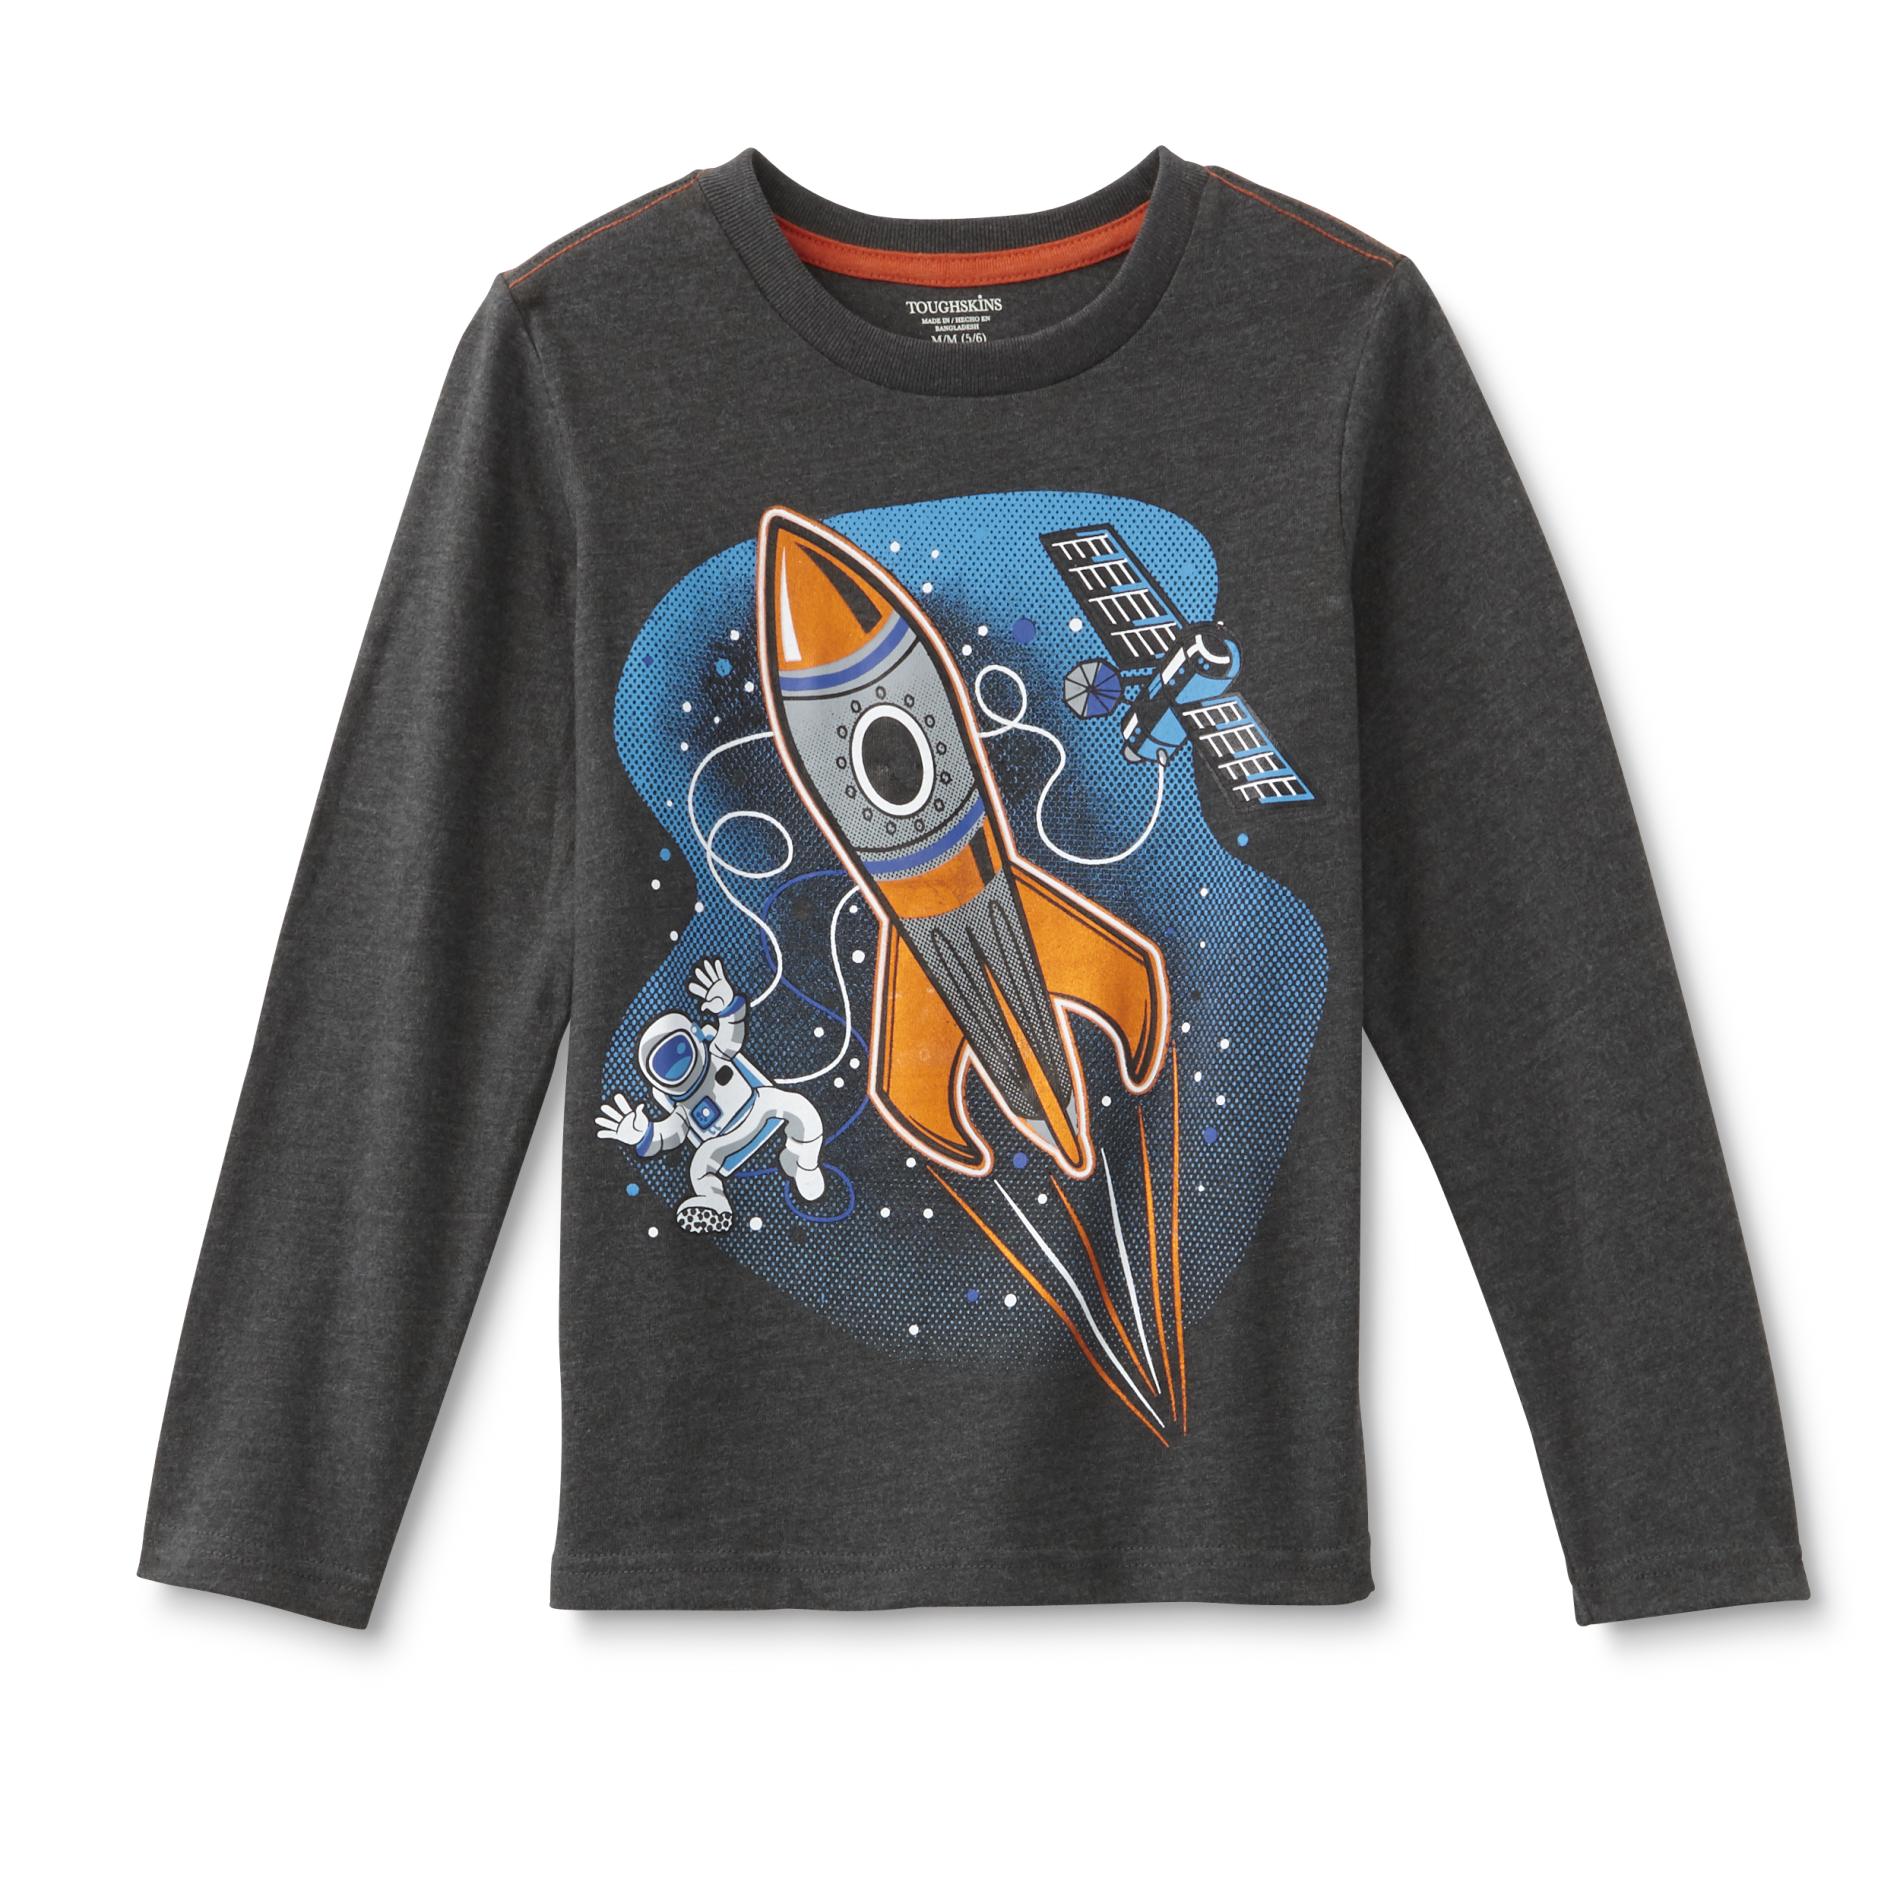 Toughskins Infant & Toddler Boy's Graphic T-Shirt - Space